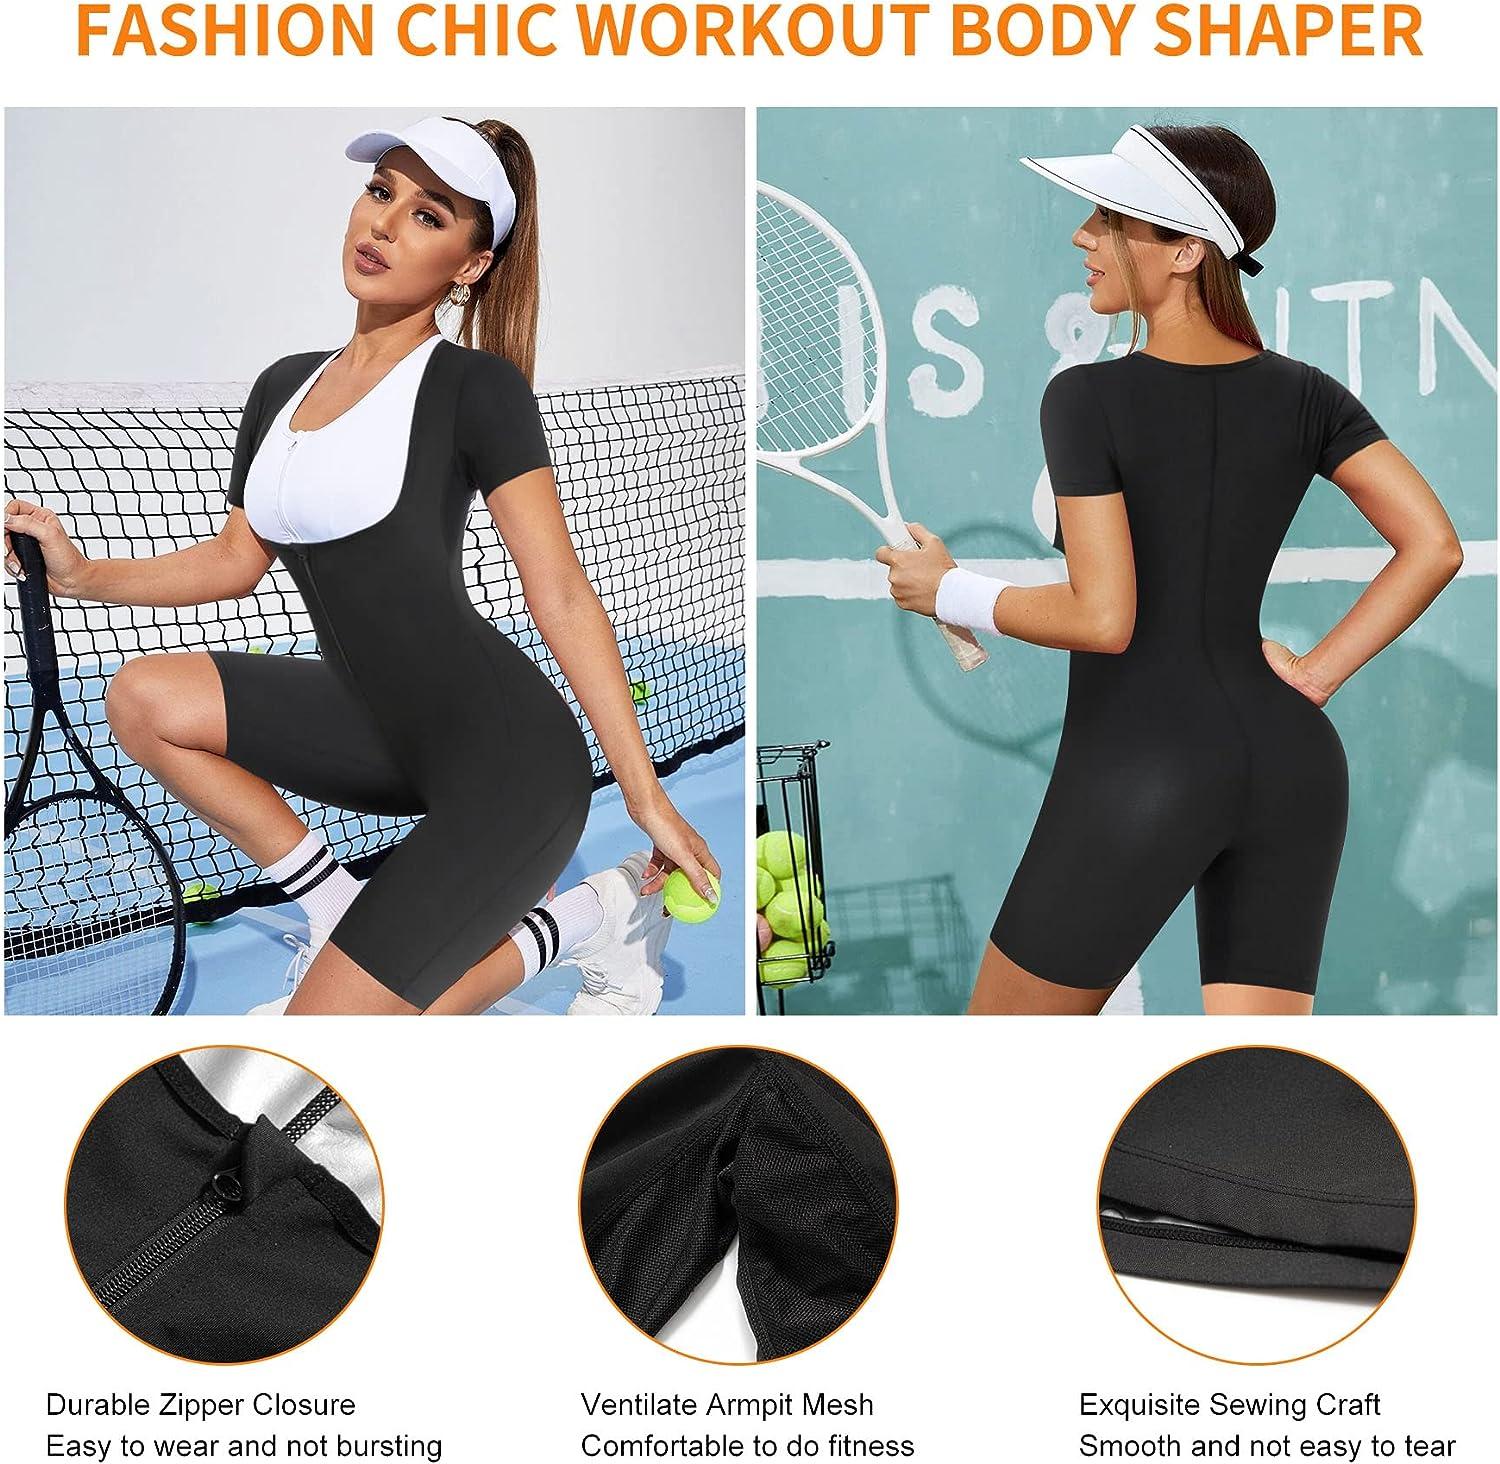 Ezshop - Exercise with perfect shaper and you will sweat